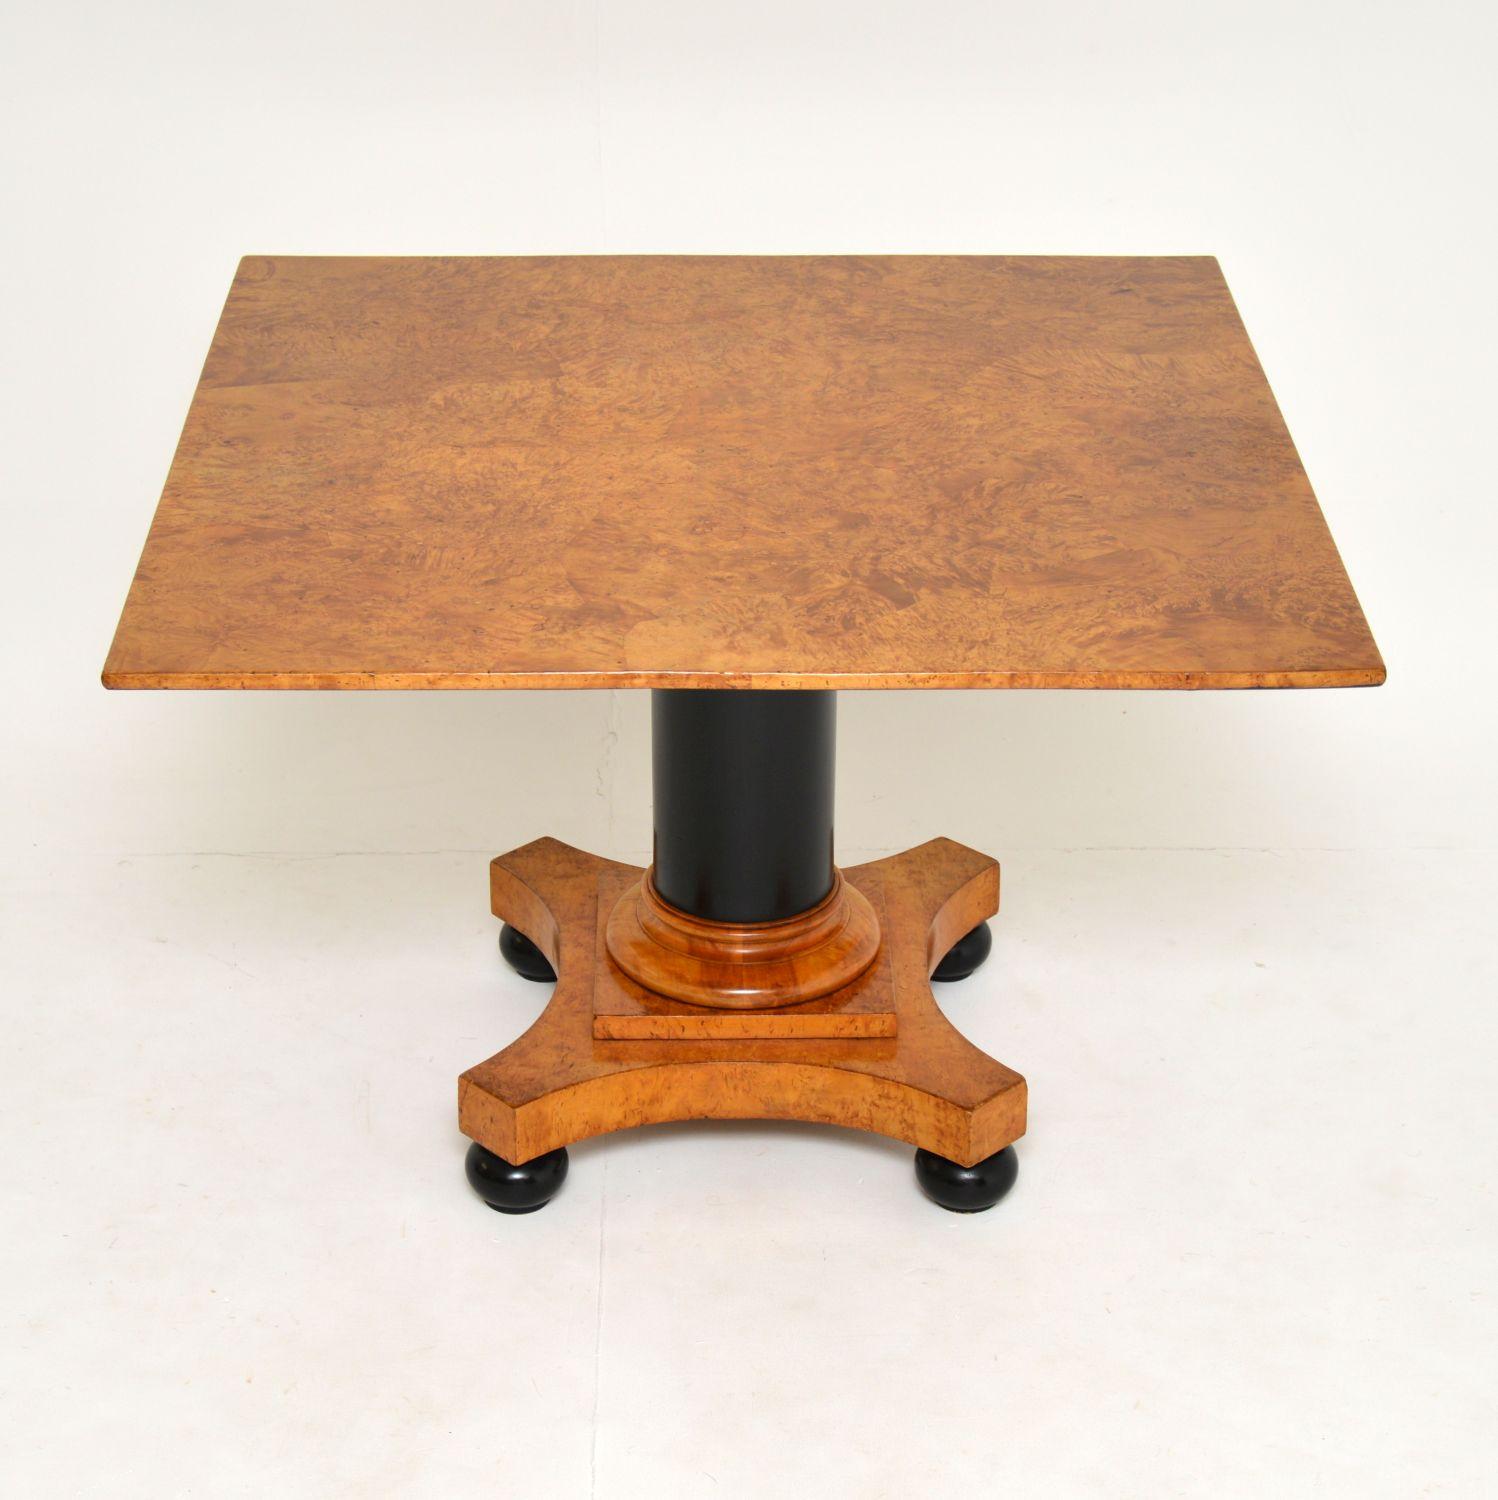 A stunning antique coffee / occasional table, this was made in Sweden and dates from around the 1840’s period. It is beautifully made from burr birch and ebonised solid wood.

The square top is large and has the most exquisite colour and grain